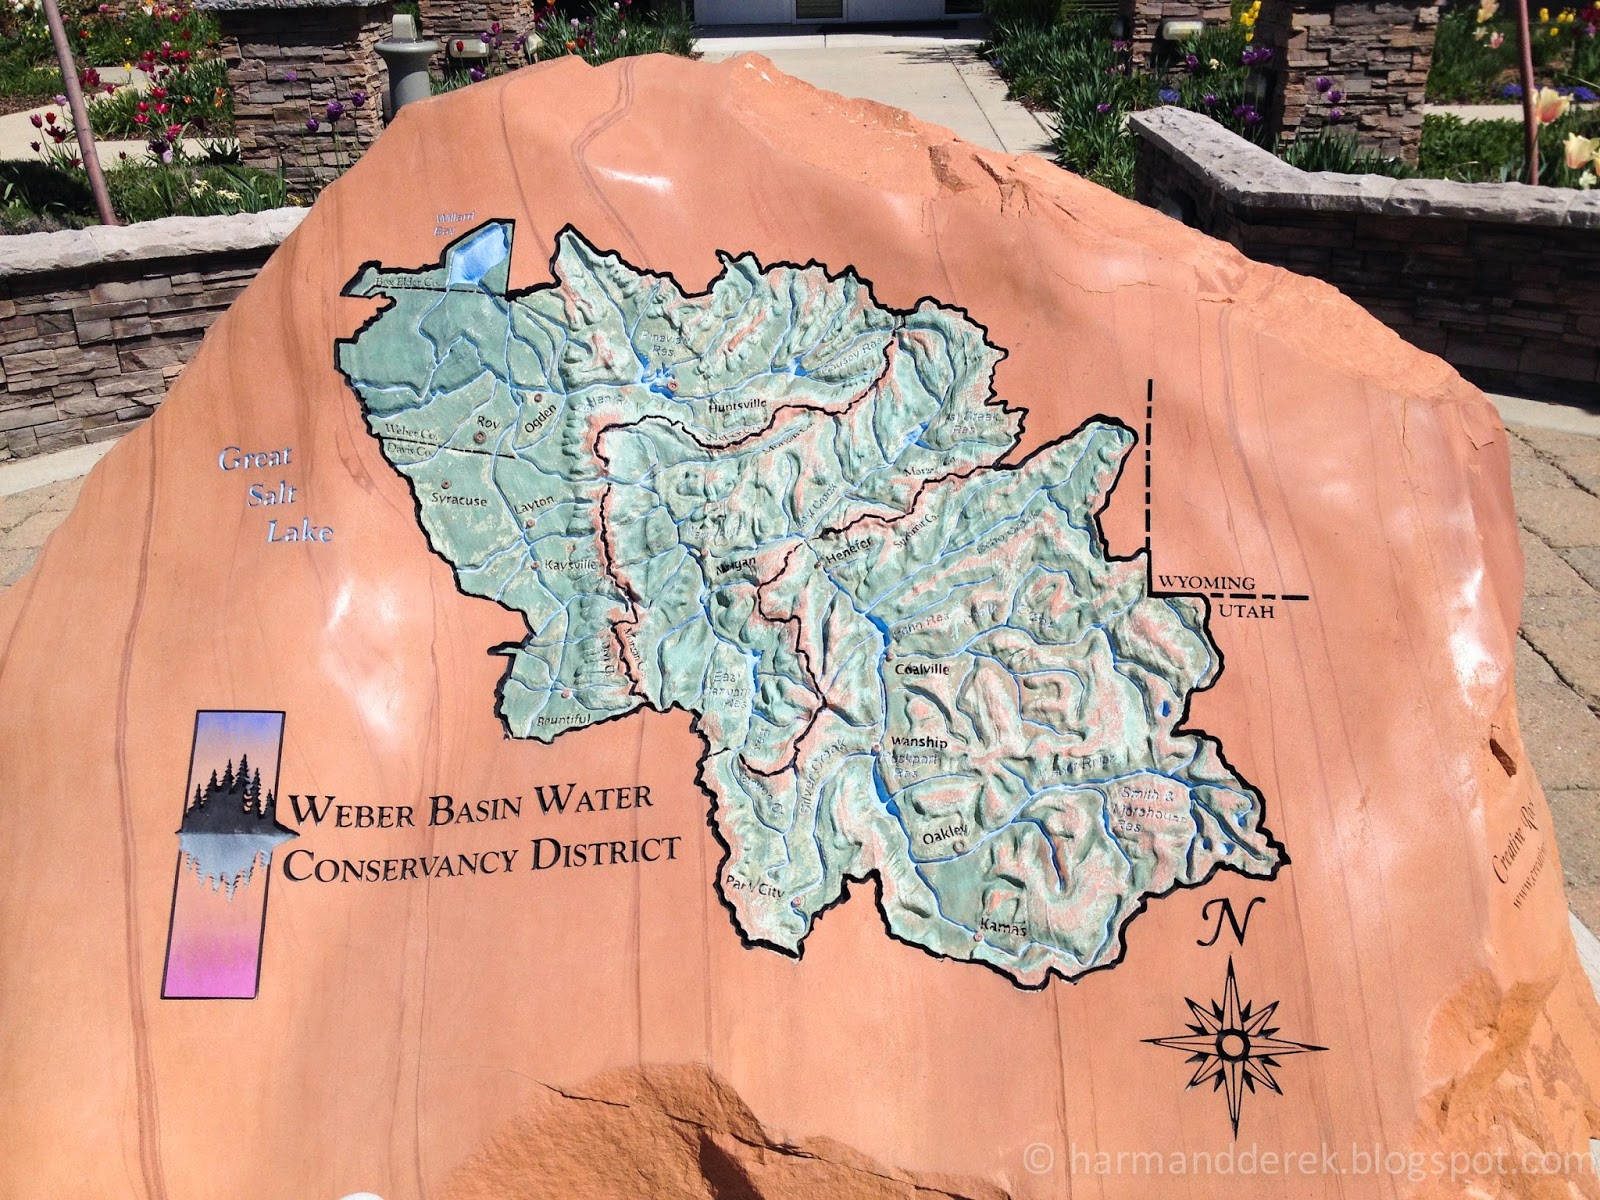 husband-and-harmony-weber-basin-water-garden-and-a-whole-lot-of-color